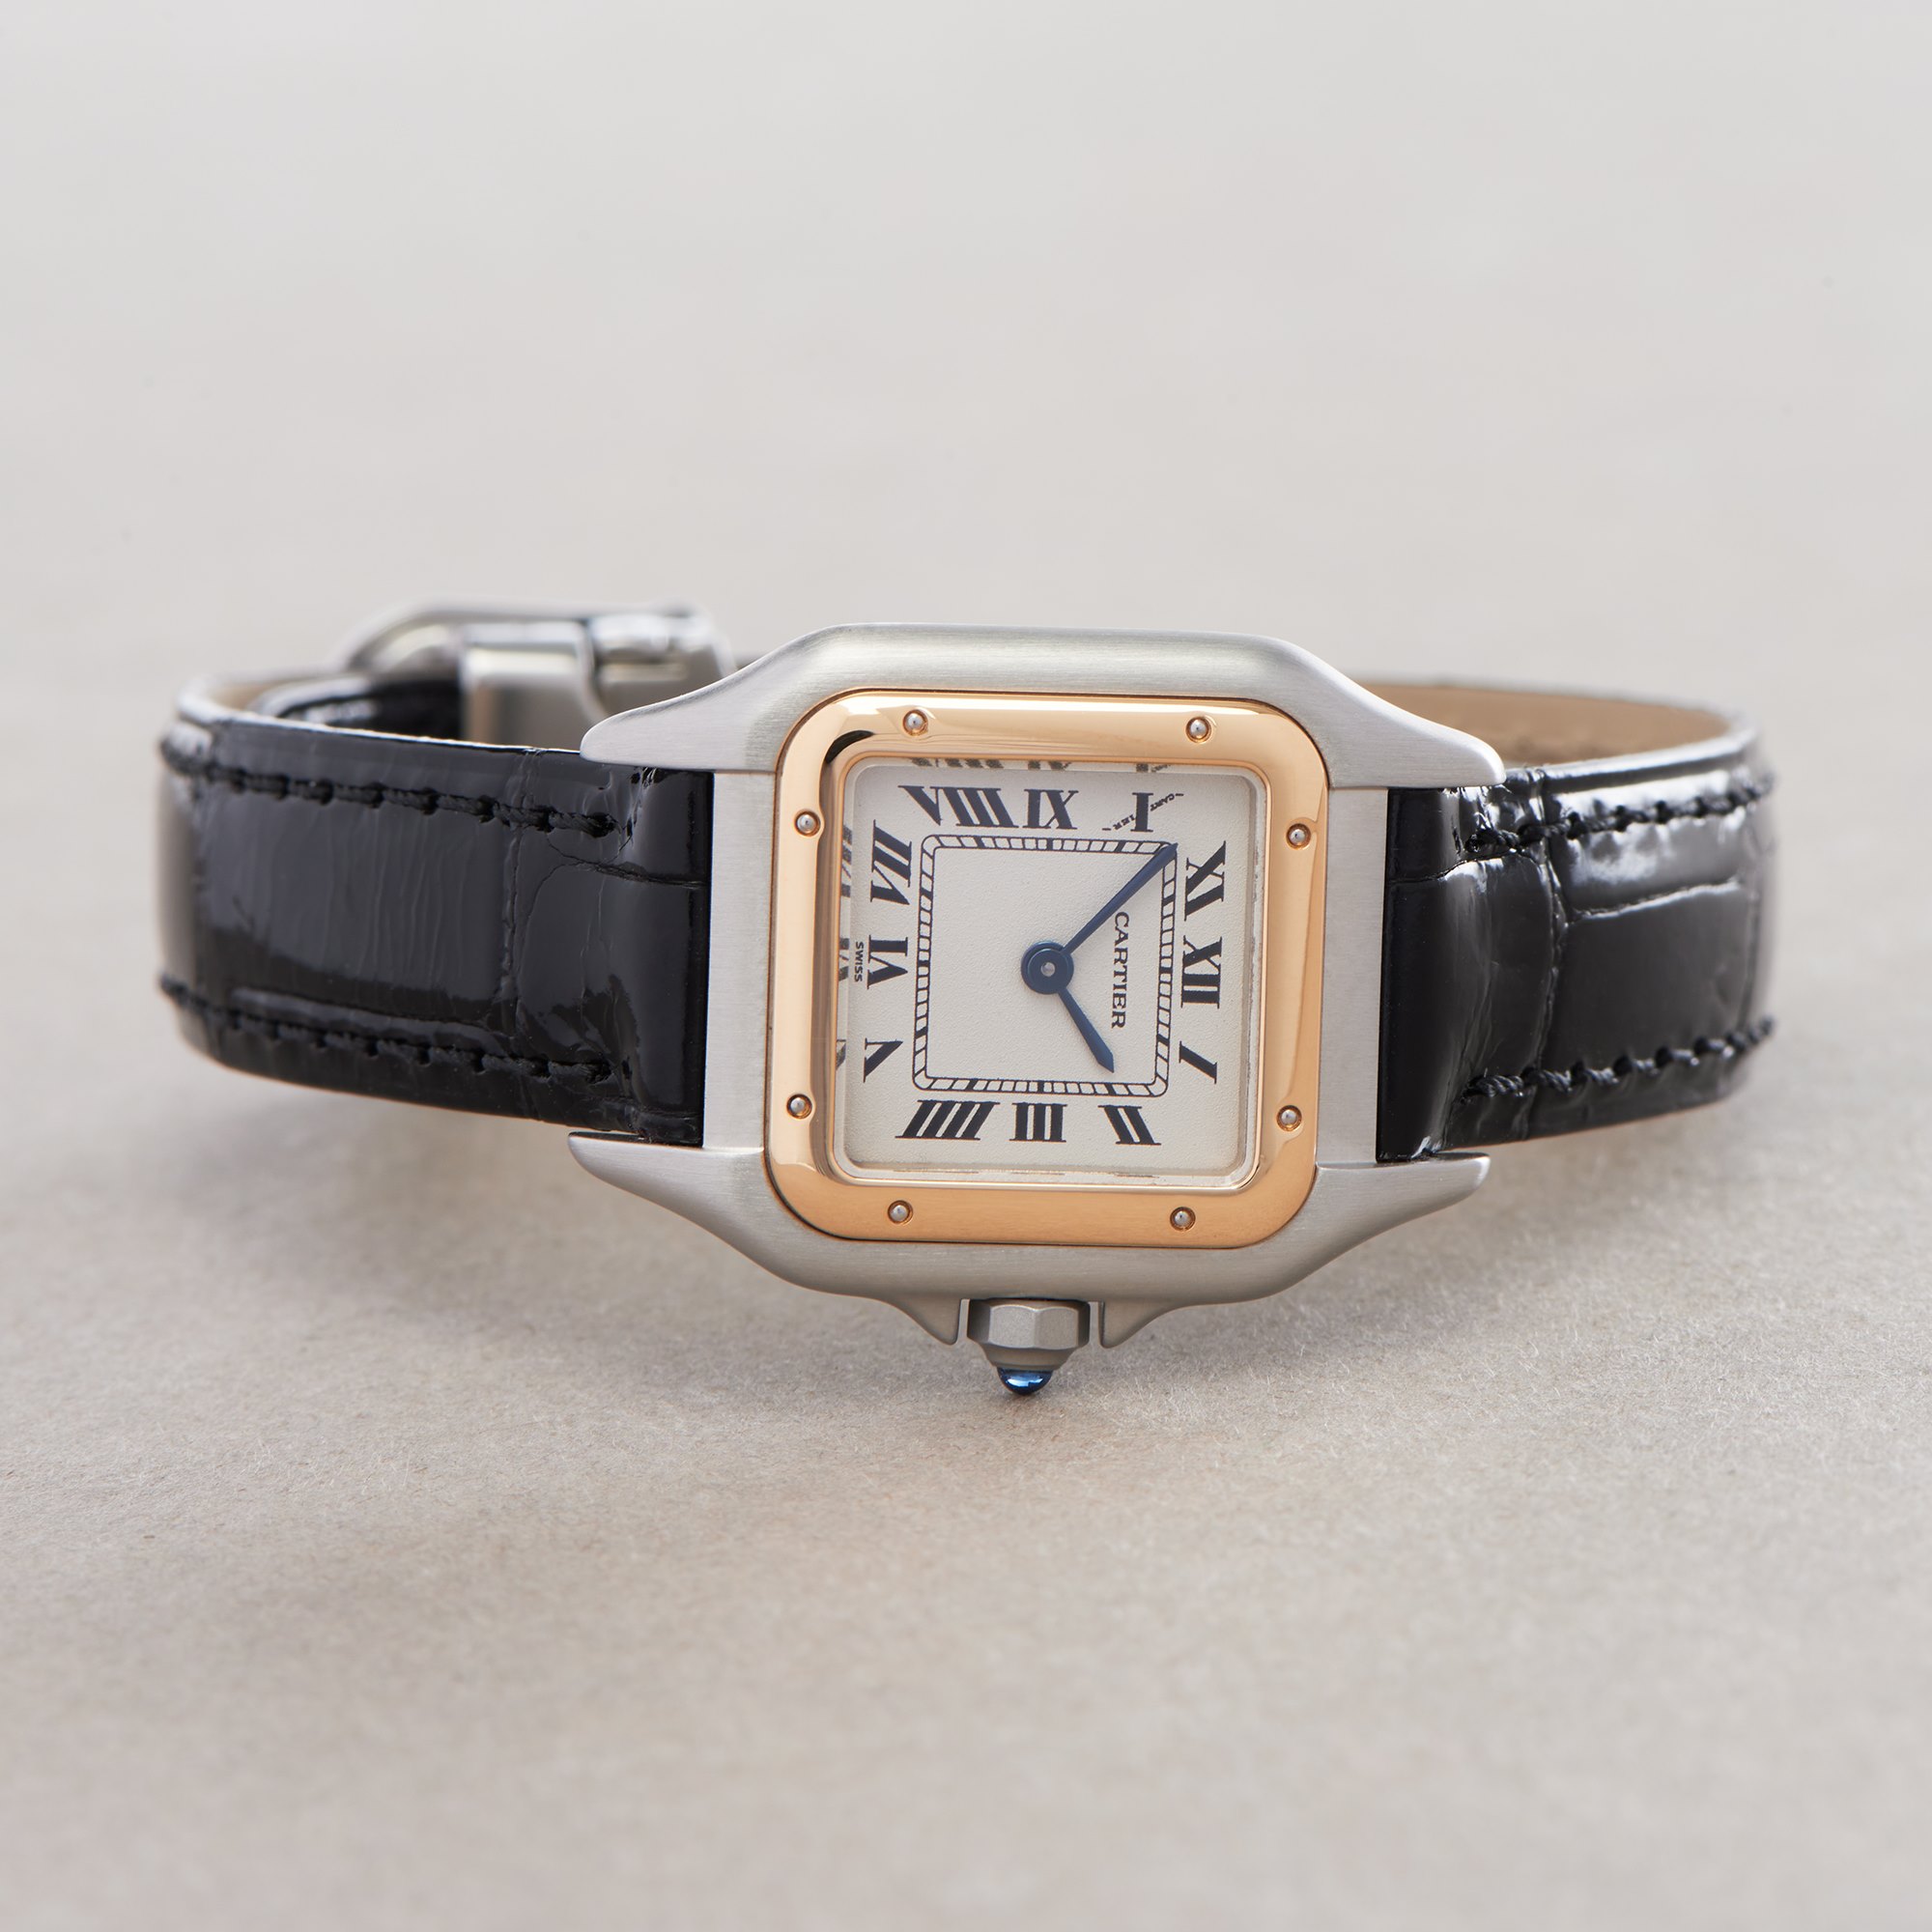 Cartier Panthère 18K Yellow Gold & Stainless Steel W250295D or 1120